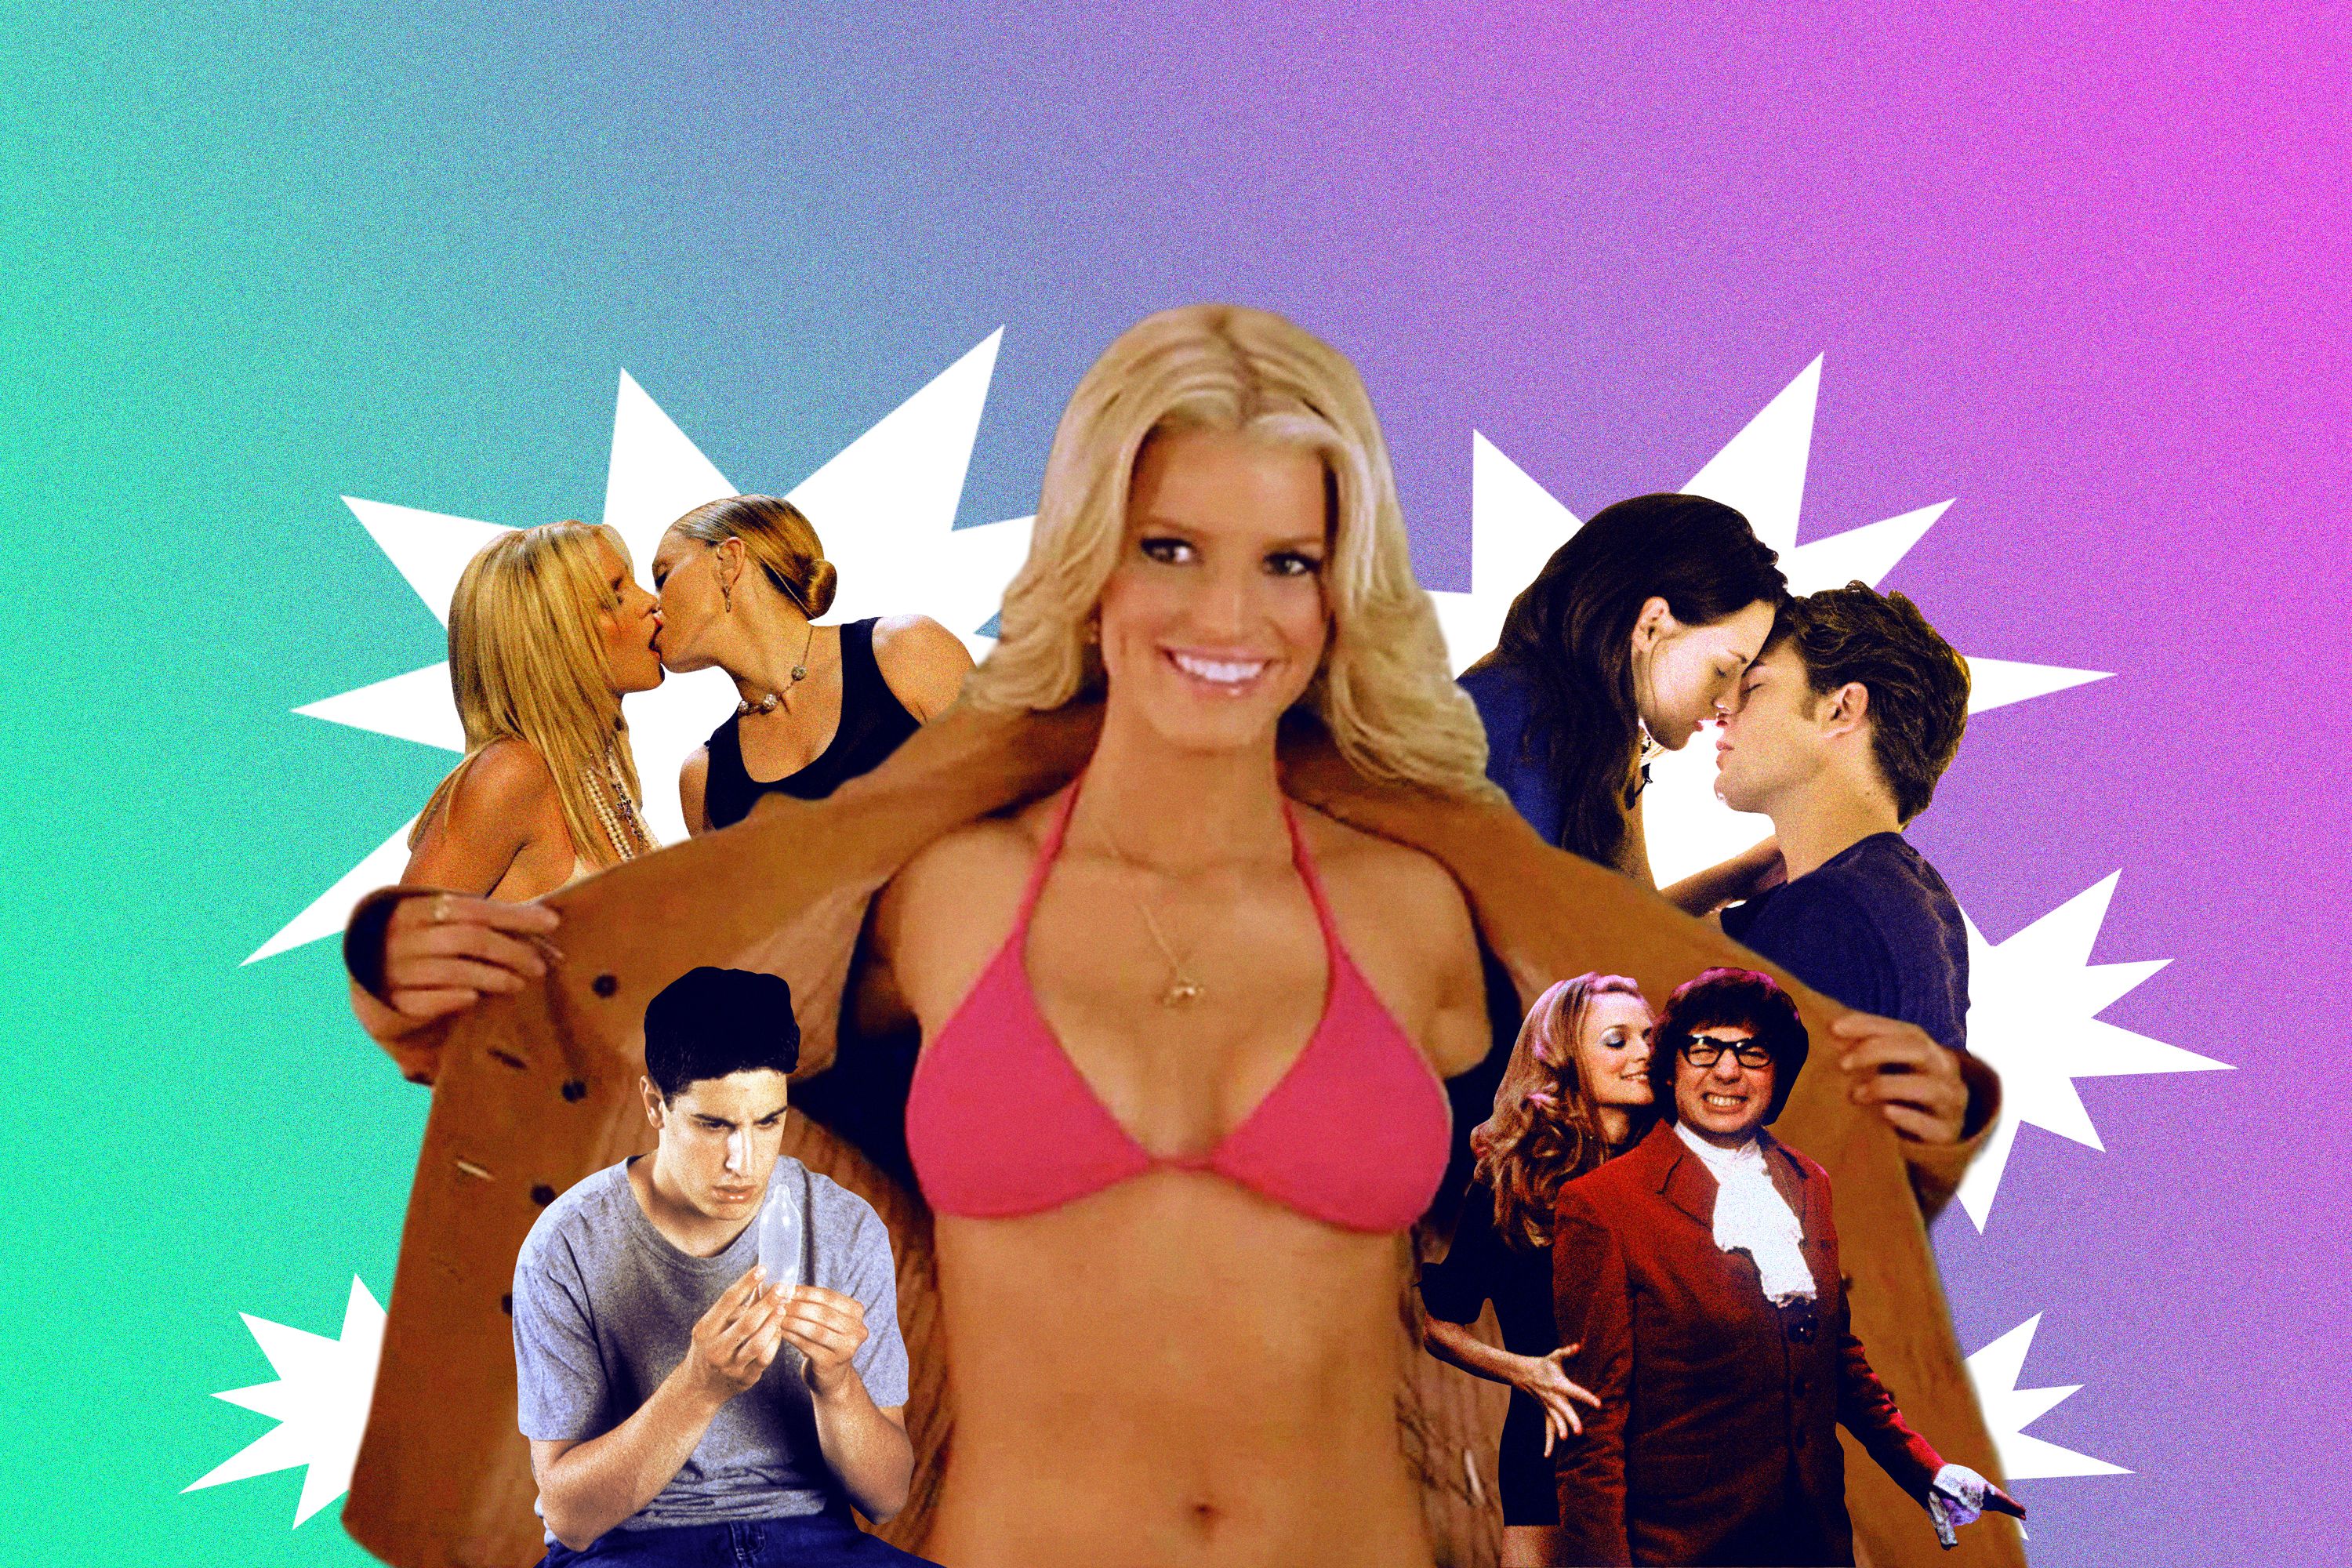 The 25 Horniest Moments of the 2000s